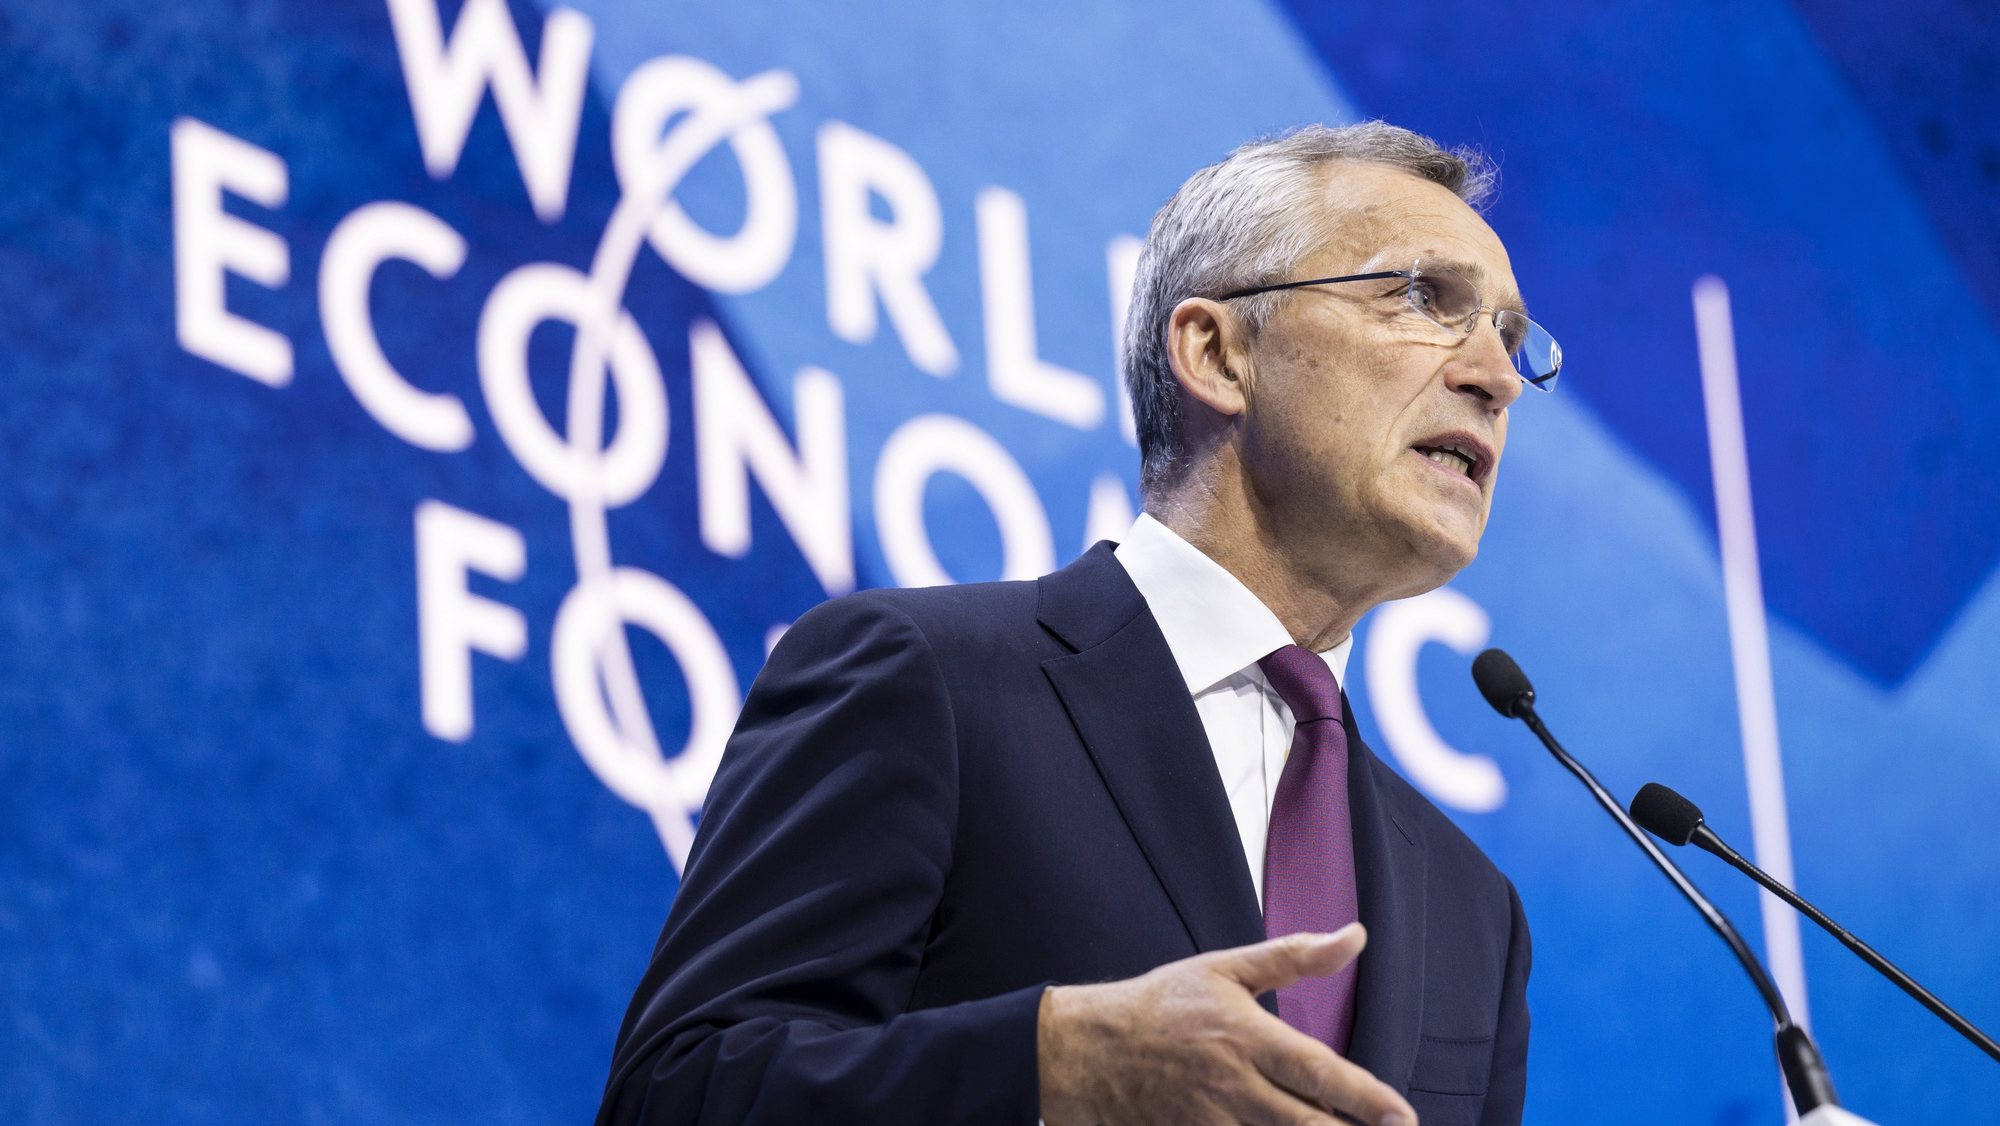 epa09971231 North Atlantic Treaty Organization (NATO) Secretary-General Jens Stoltenberg addresses a panel session during the 51st annual meeting of the World Economic Forum (WEF) in Davos, Switzerland, 24 May 2022. The forum has been postponed due to the COVID-19 pandemic and was rescheduled to early summer. The meeting brings together entrepreneurs, scientists, corporate and political leaders in Davos under the topic &#039;History at a Turning Point: Government Policies and Business Strategies&#039; from 22 to 26 May 2022.  EPA/GIAN EHRENZELLER